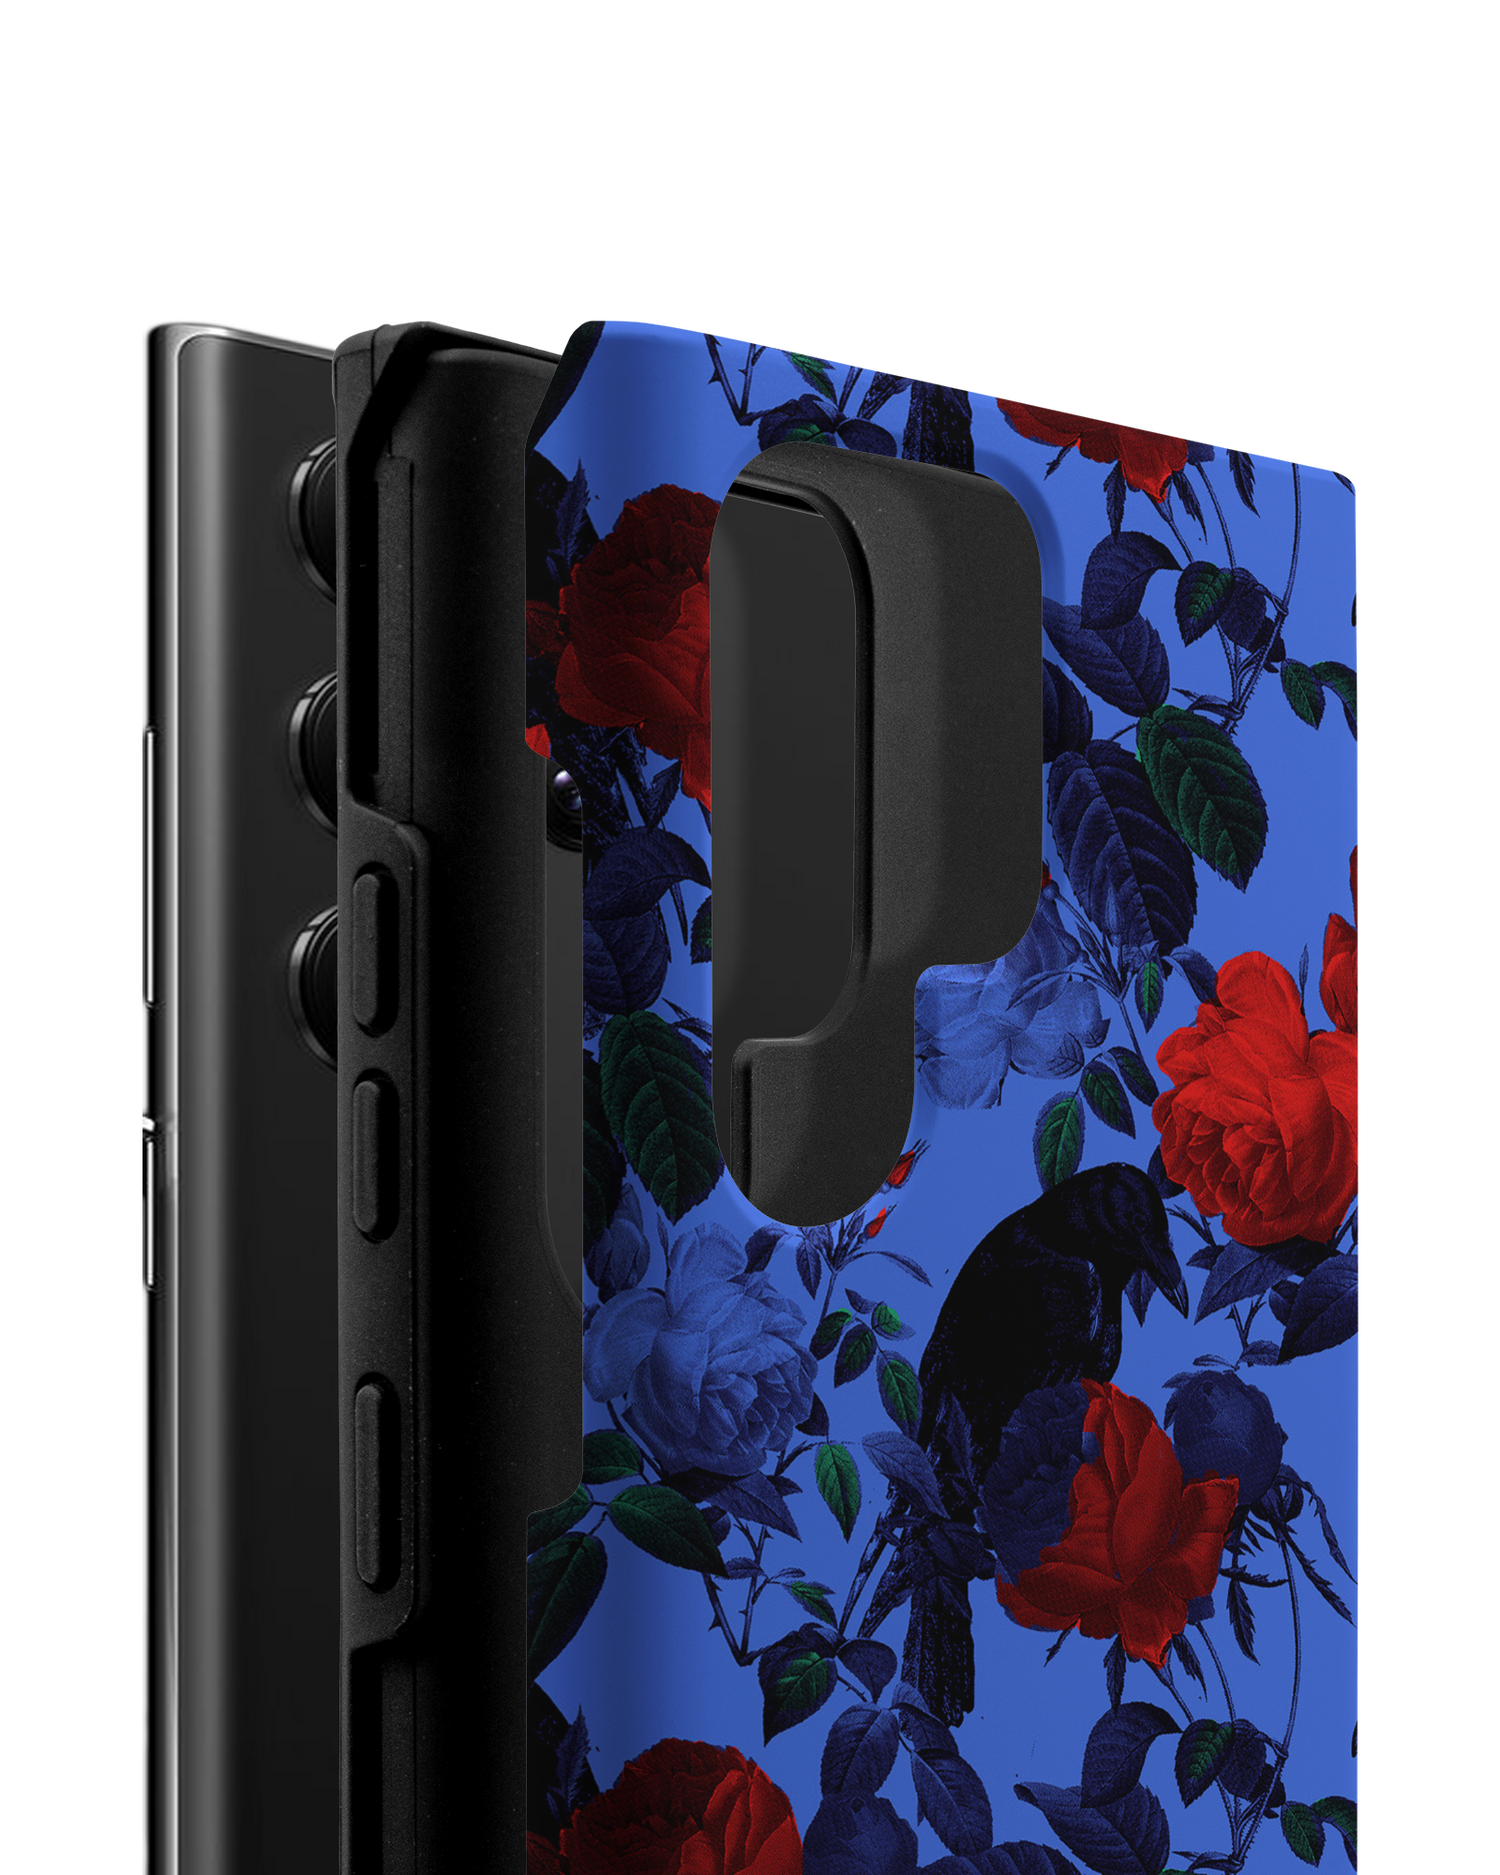 Roses And Ravens Premium Phone Case Samsung Galaxy S22 Ultra 5G consisting of 2 parts